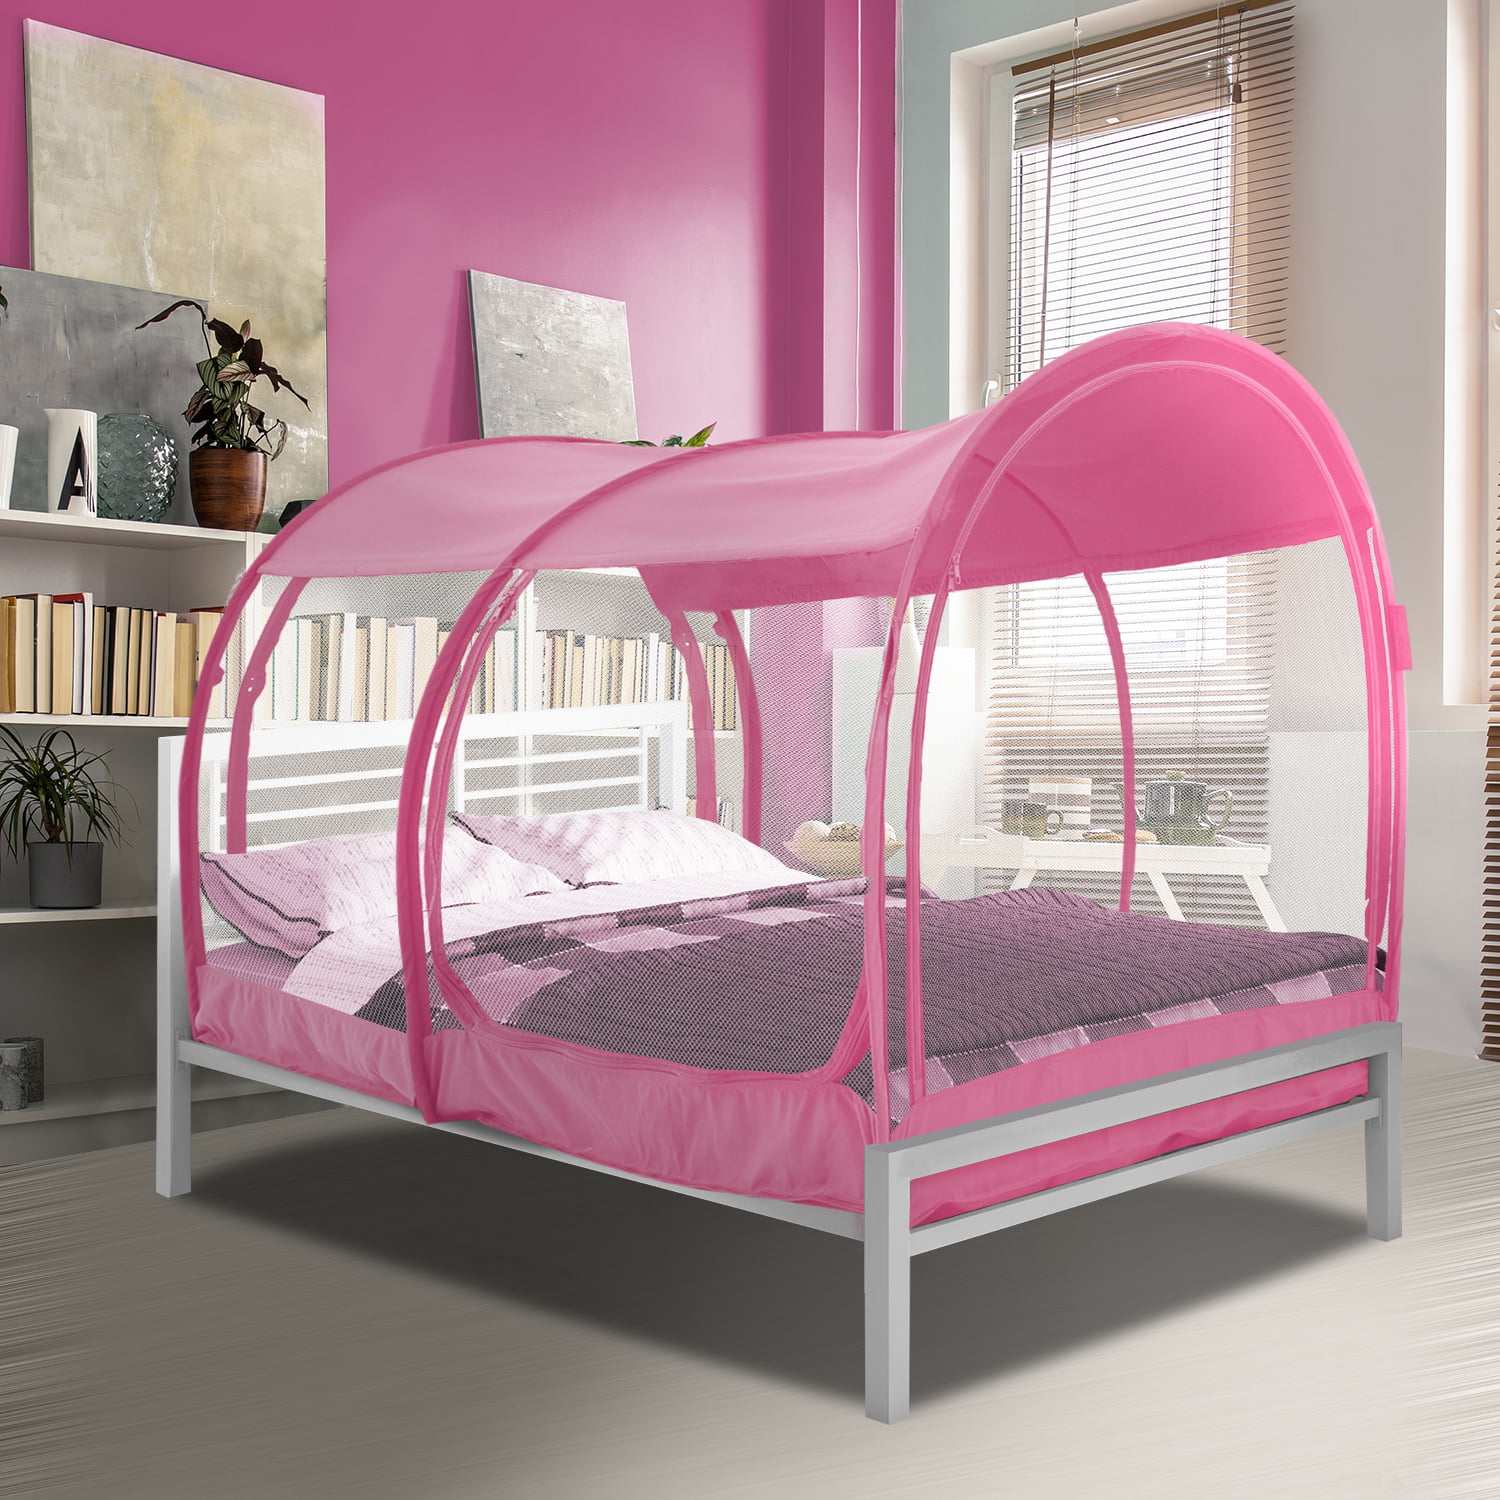 Bed Tent Mosquito Net Privacy Space, Twin Bunk Bed Canopy